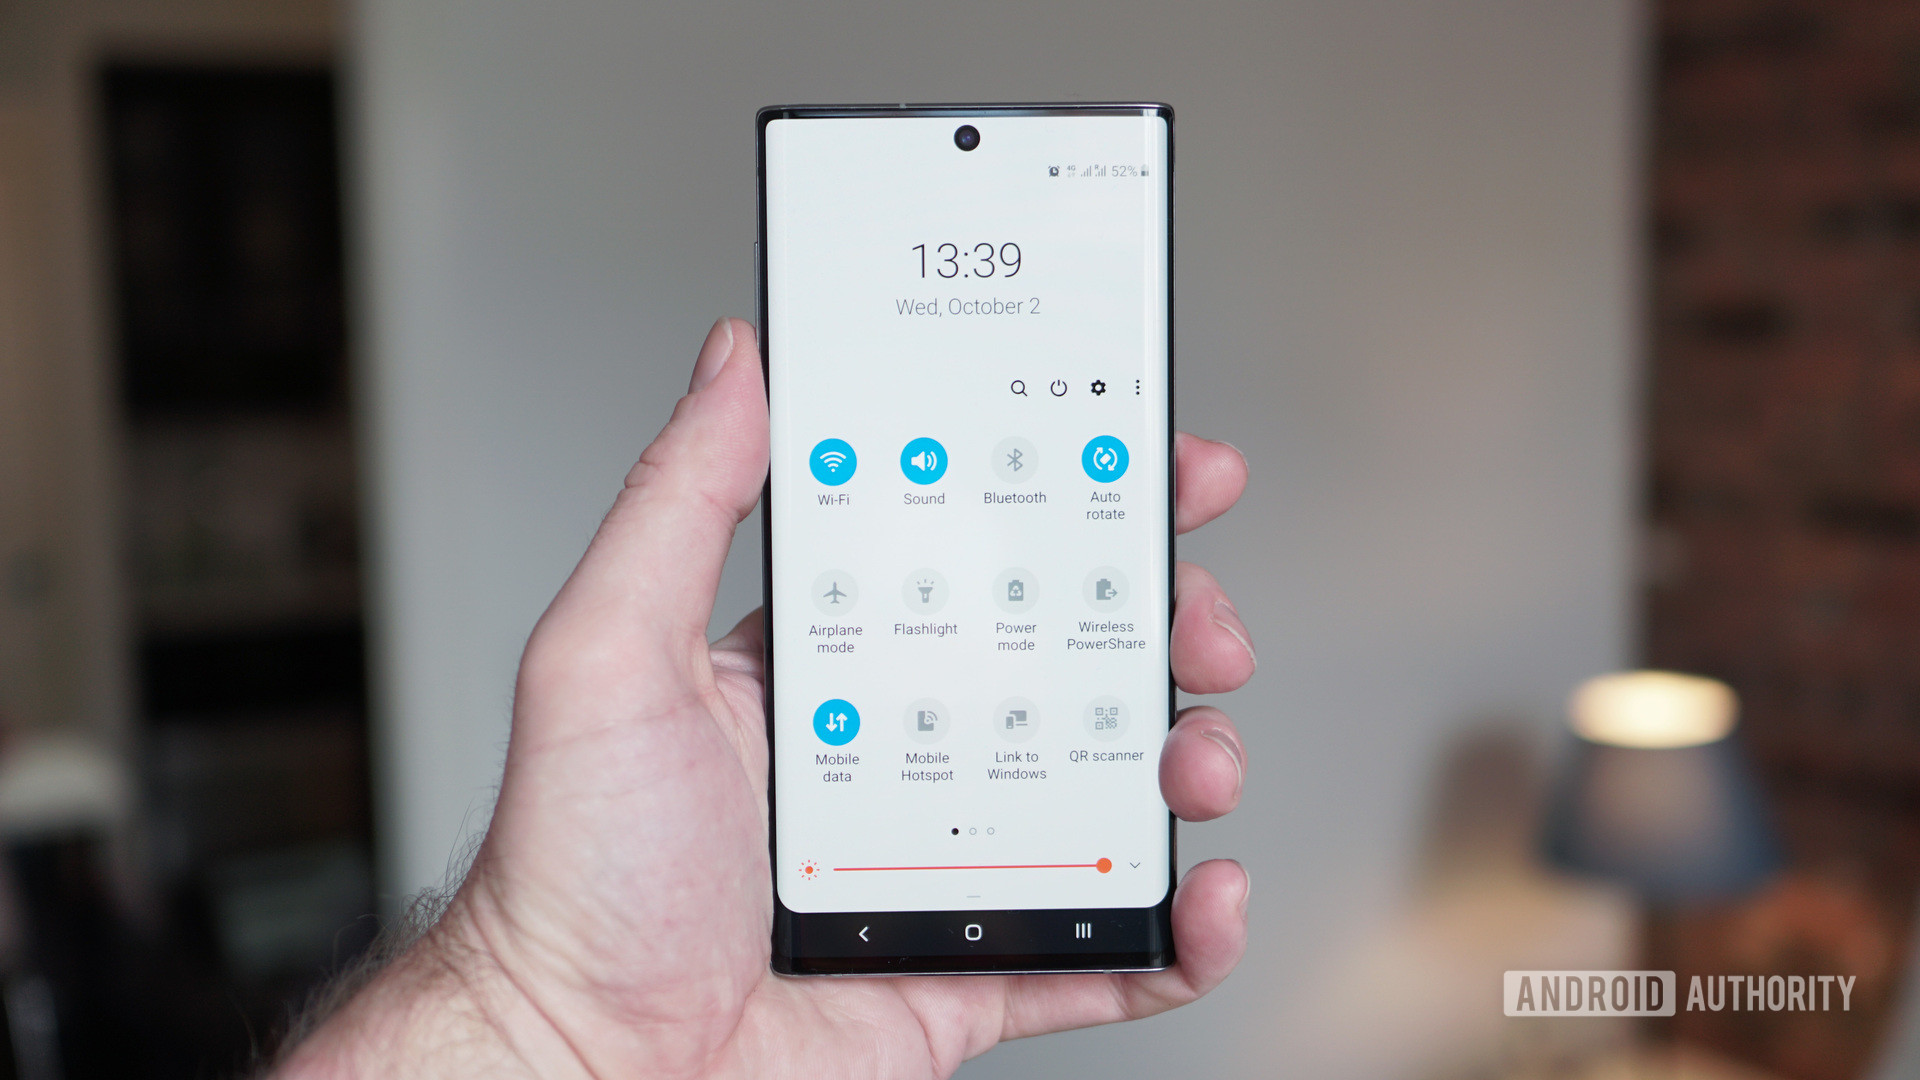 Samsung Galaxy Note 10 quick settings menu in hand